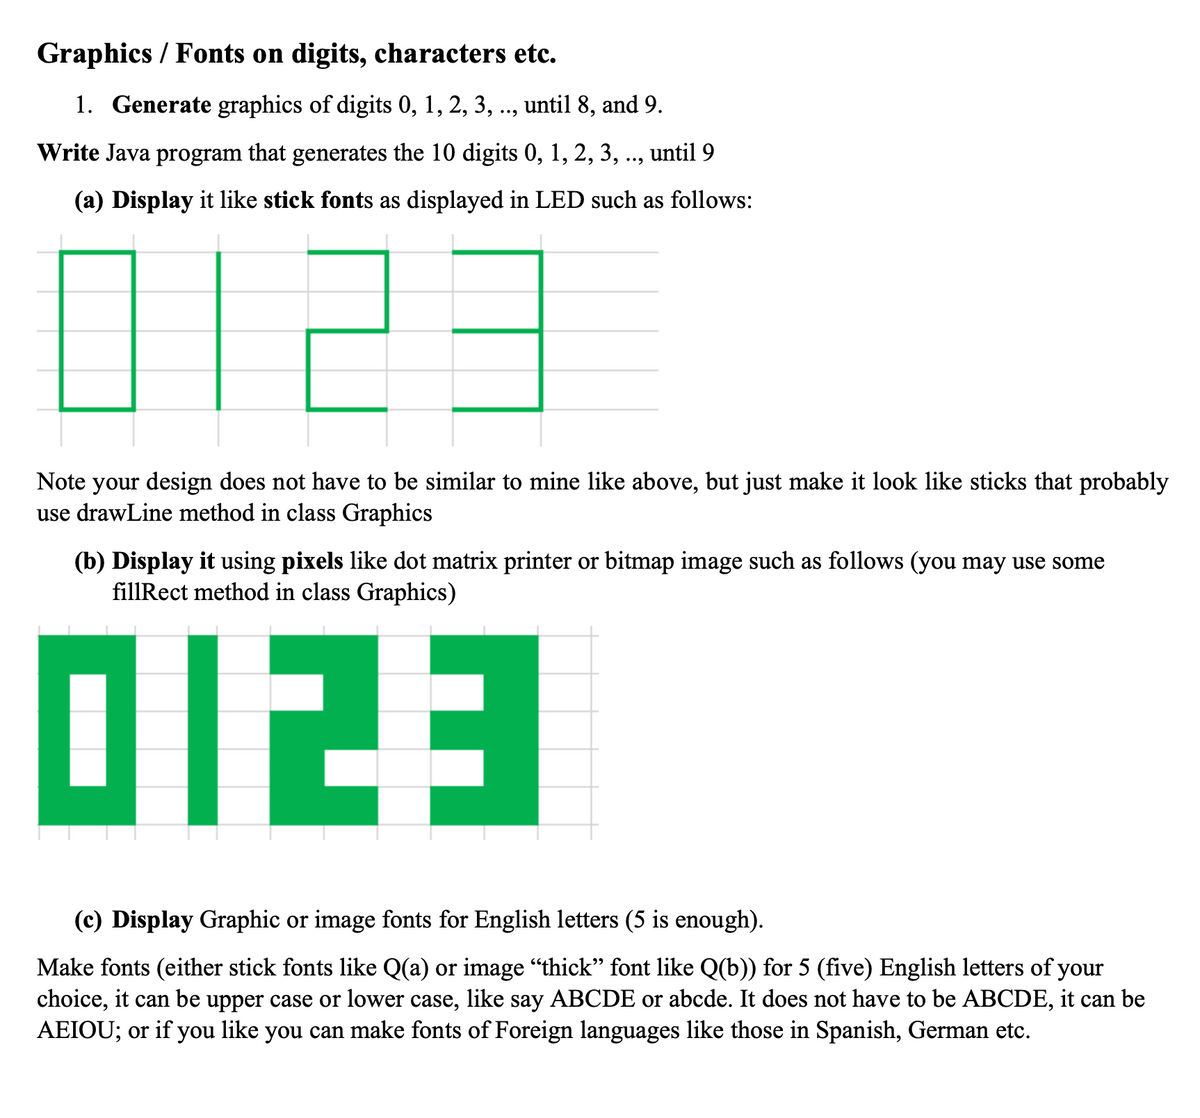 Graphics / Fonts on digits, characters etc.
1. Generate graphics of digits 0, 1, 2, 3, .., until 8, and 9.
Write Java program that generates the 10 digits 0, 1, 2, 3, .., until 9
(a) Display it like stick fonts as displayed in LED such as follows:
0123
Note your design does not have to be similar to mine like above, but just make it look like sticks that probably
use drawLine method in class Graphics
(b) Display it using pixels like dot matrix printer or bitmap image such as follows (you may use some
fillRect method in class Graphics)
0123
(c) Display Graphic or image fonts for English letters (5 is enough).
Make fonts (either stick fonts like Q(a) or image "thick” font like Q(b)) for 5 (five) English letters of your
choice, it can be upper case or lower case, like say ABCDE or abcde. It does not have to be ABCDE, it can be
AEIOU; or if you like you can make fonts of Foreign languages like those in Spanish, German etc.